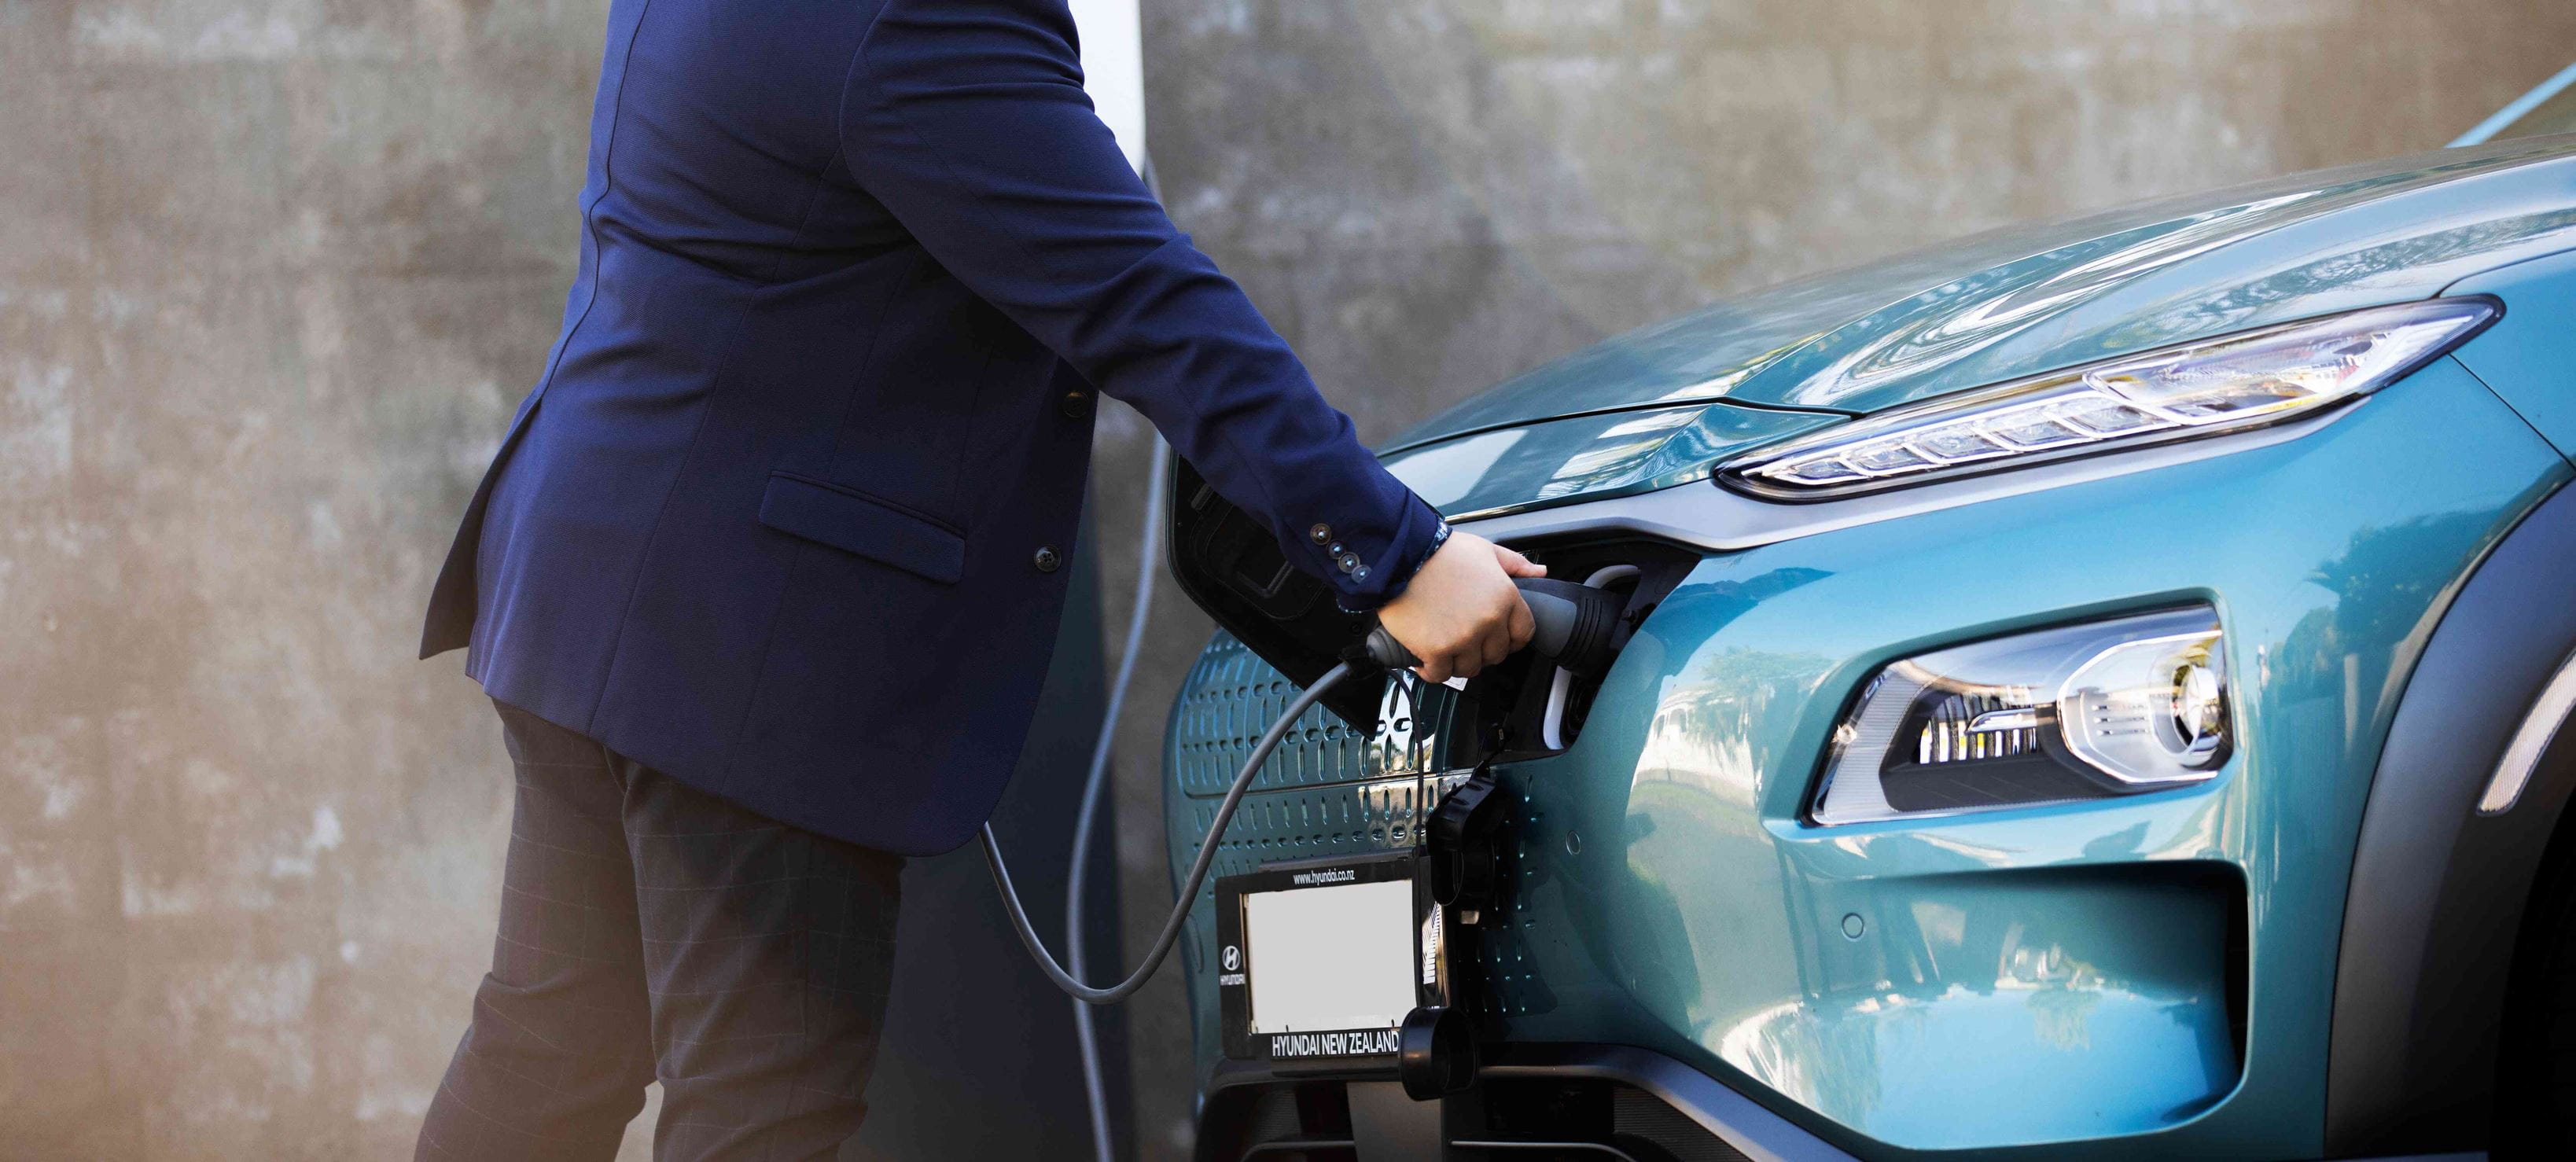 A man in a blue suit is charging an electric vehicle